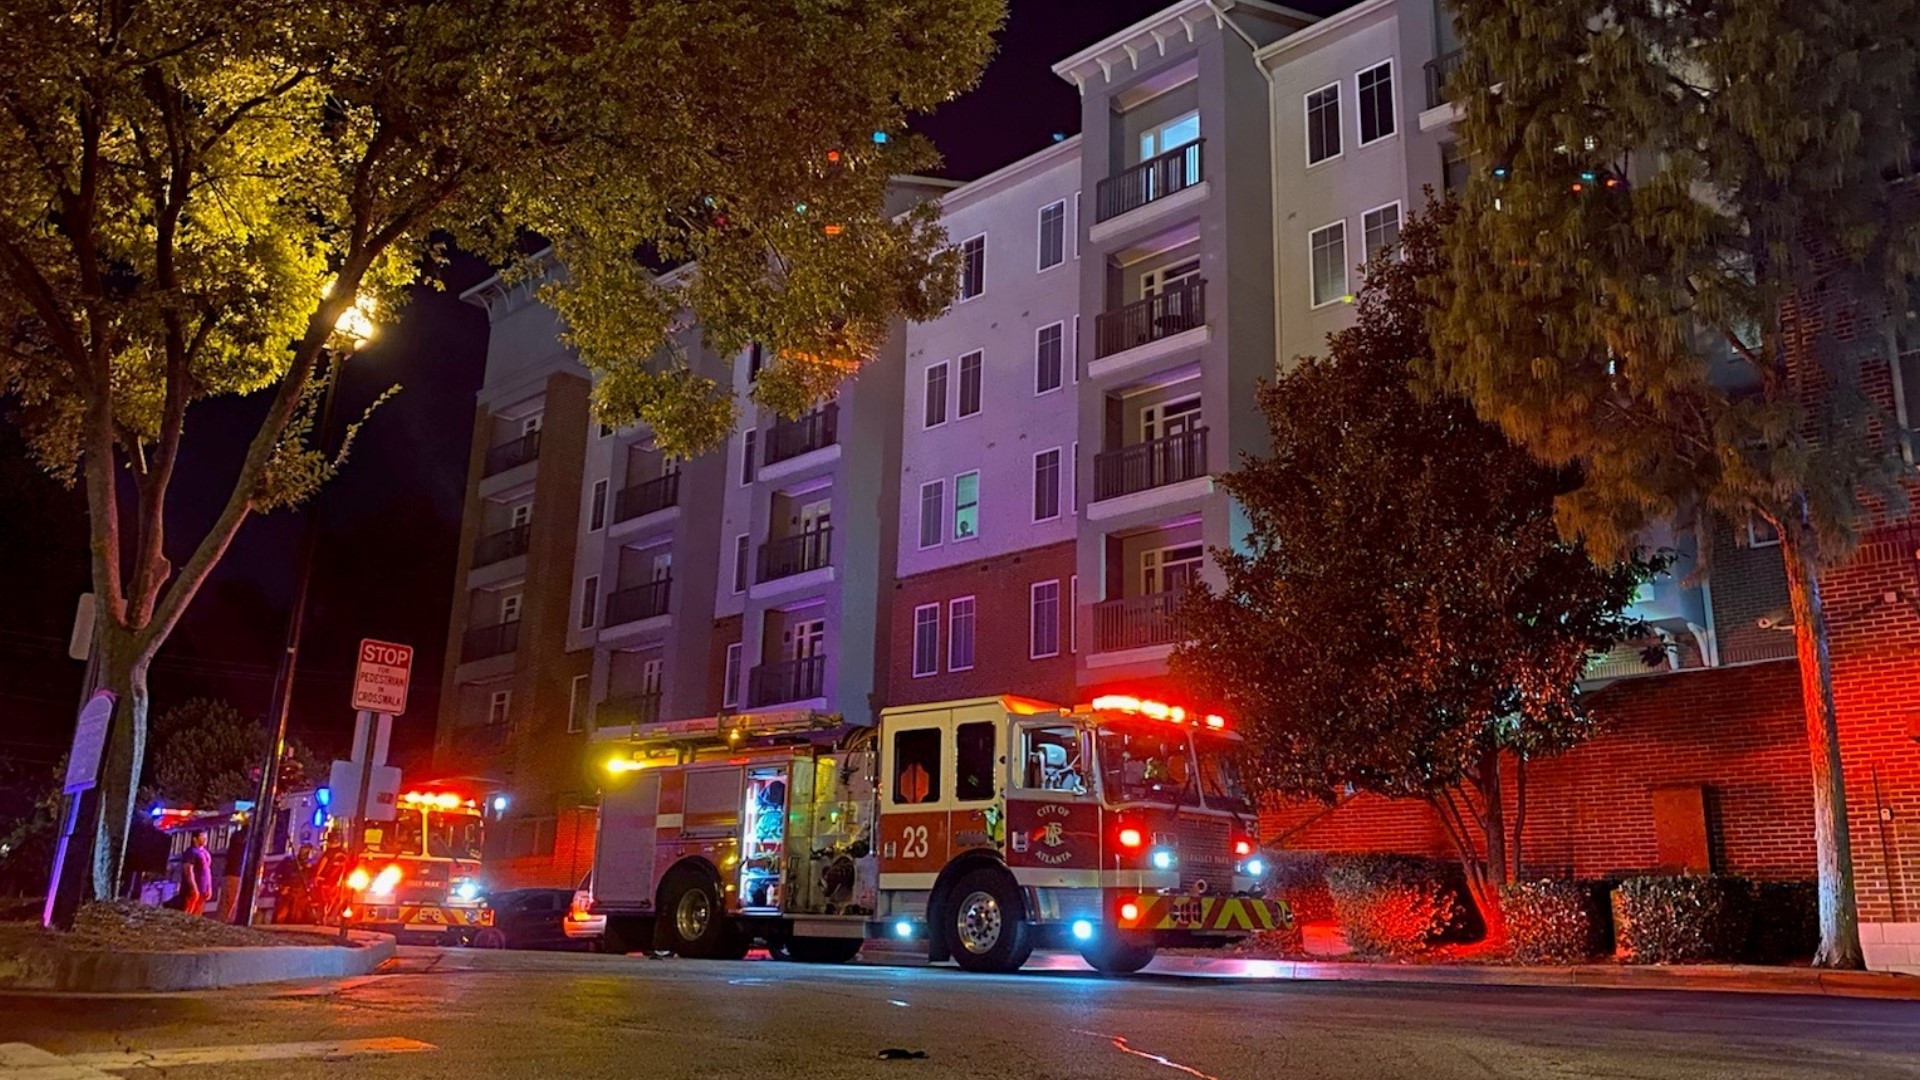 At least one person is dead after a triple shooting at an apartment complex in the Berkley Park neighborhood on Northside Drive, according to police.